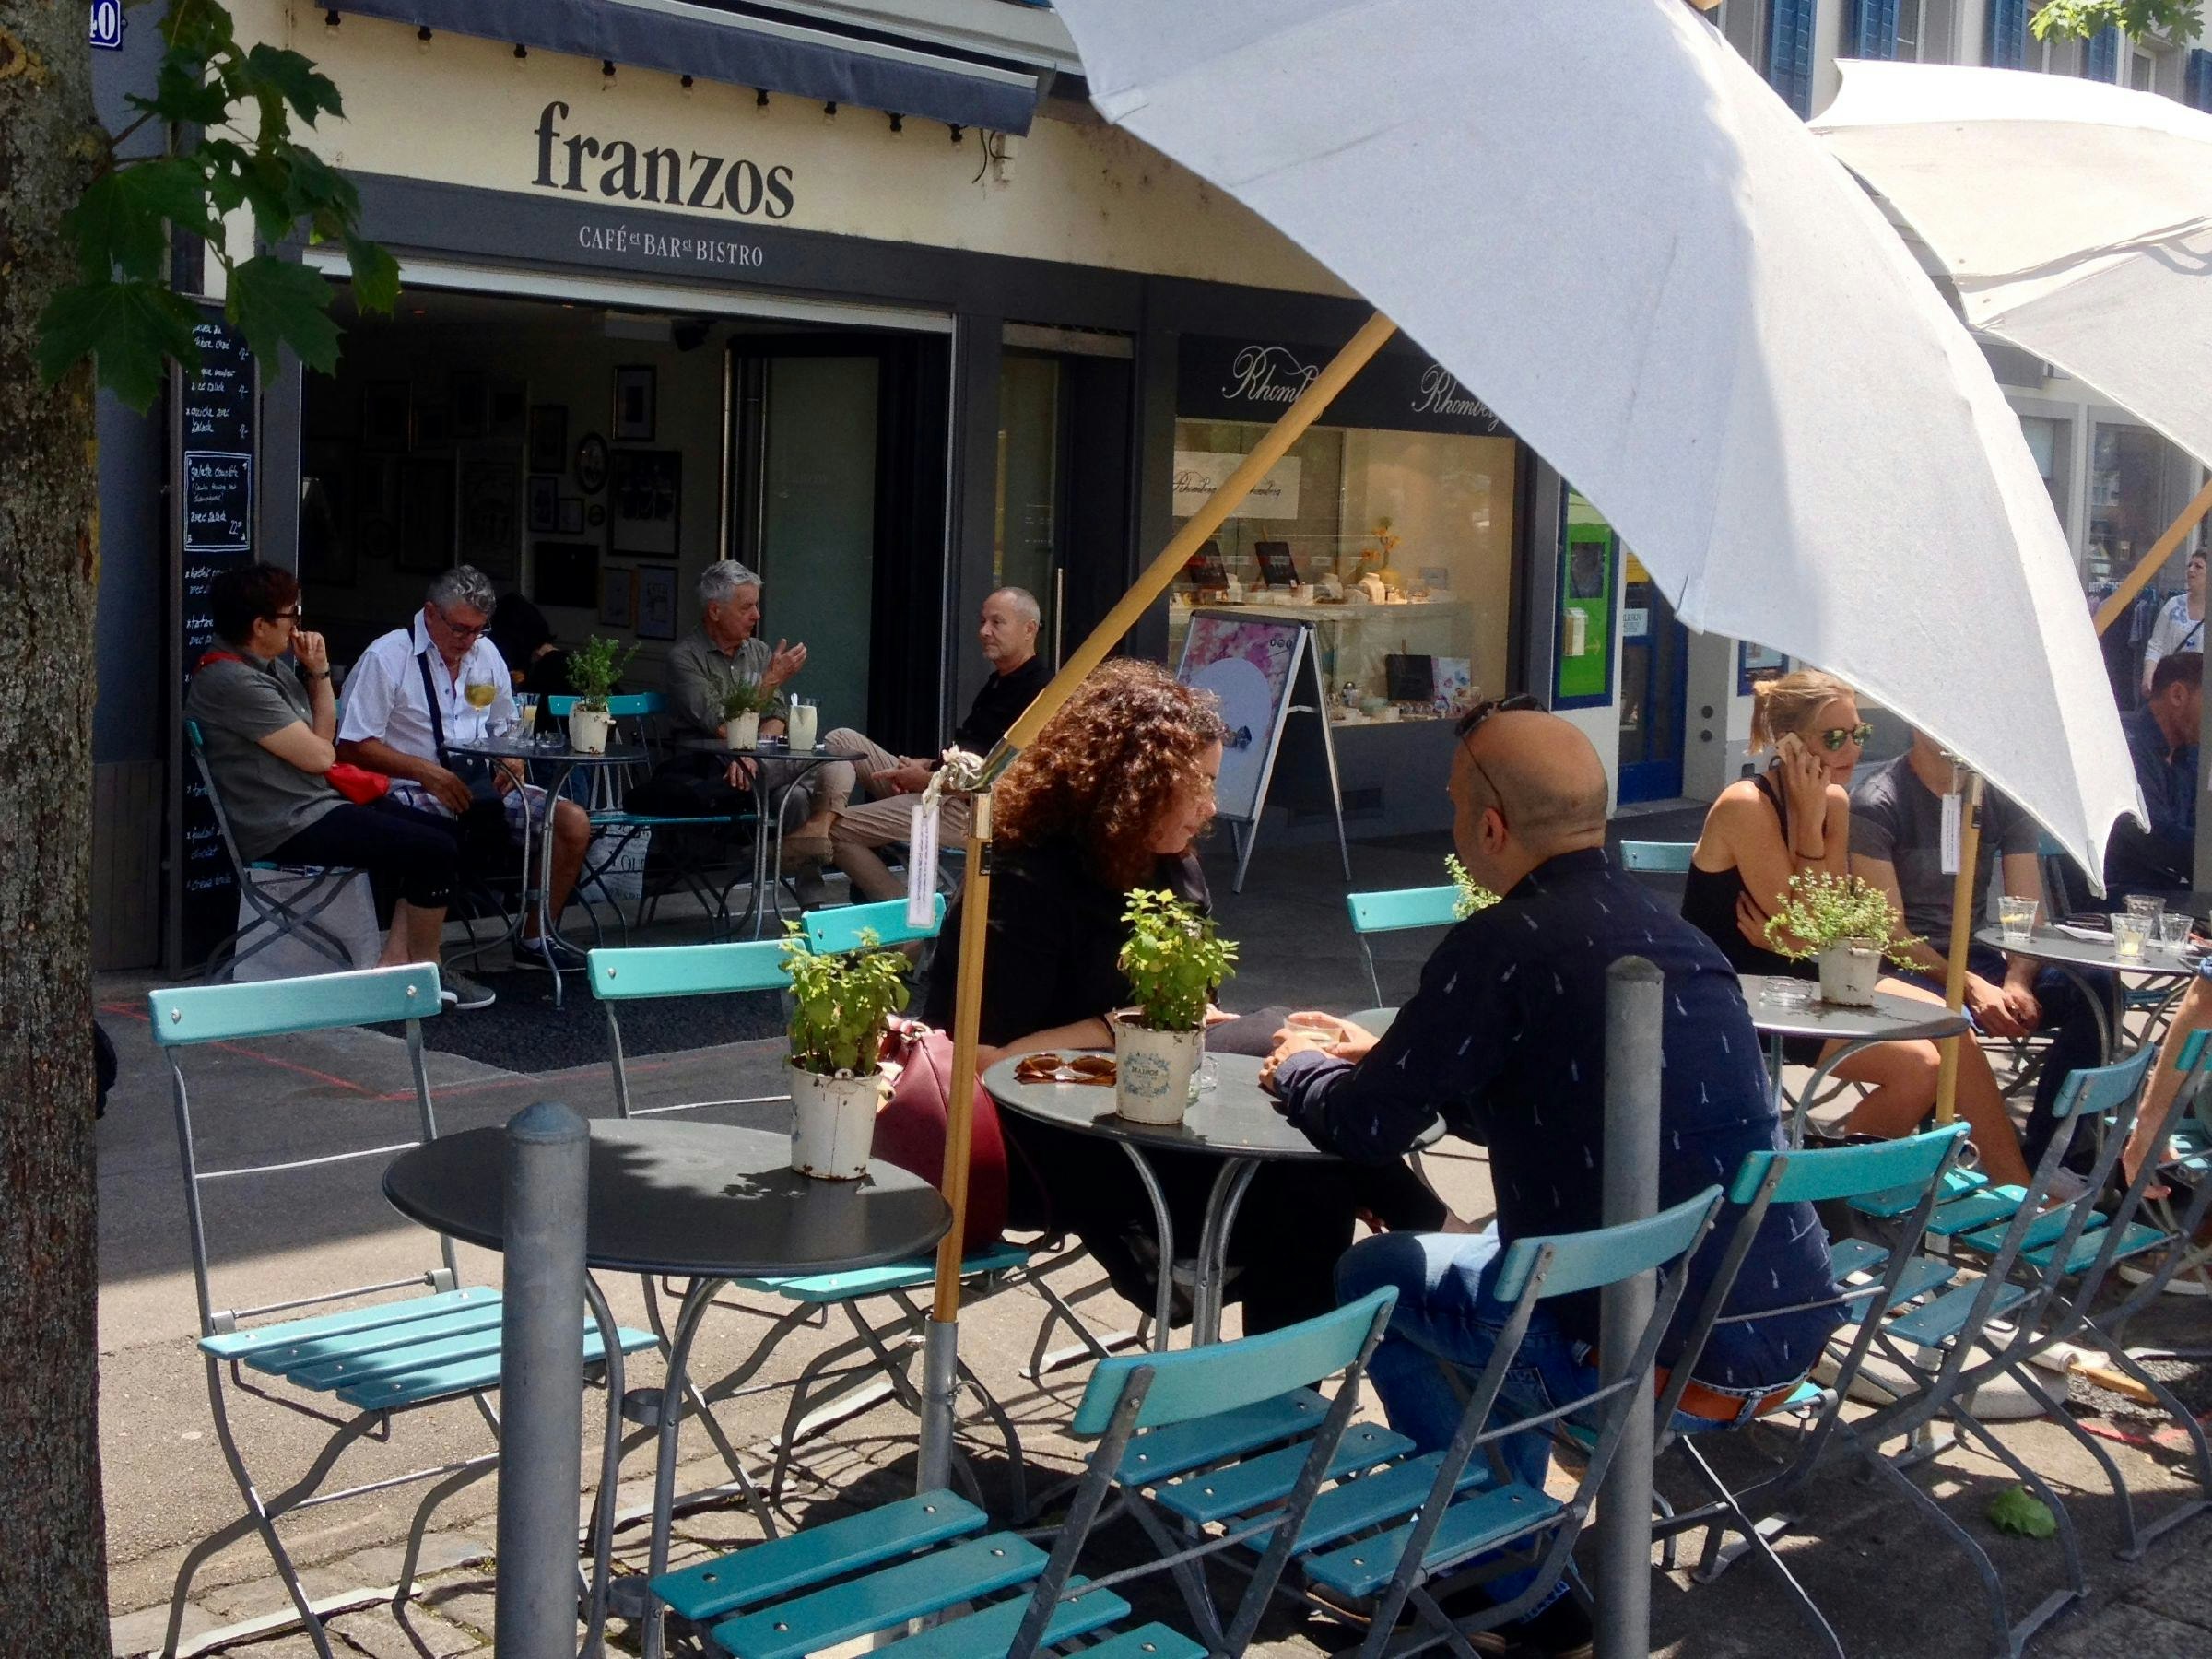 Franzos, exterior, outside seating area by the river Limmat